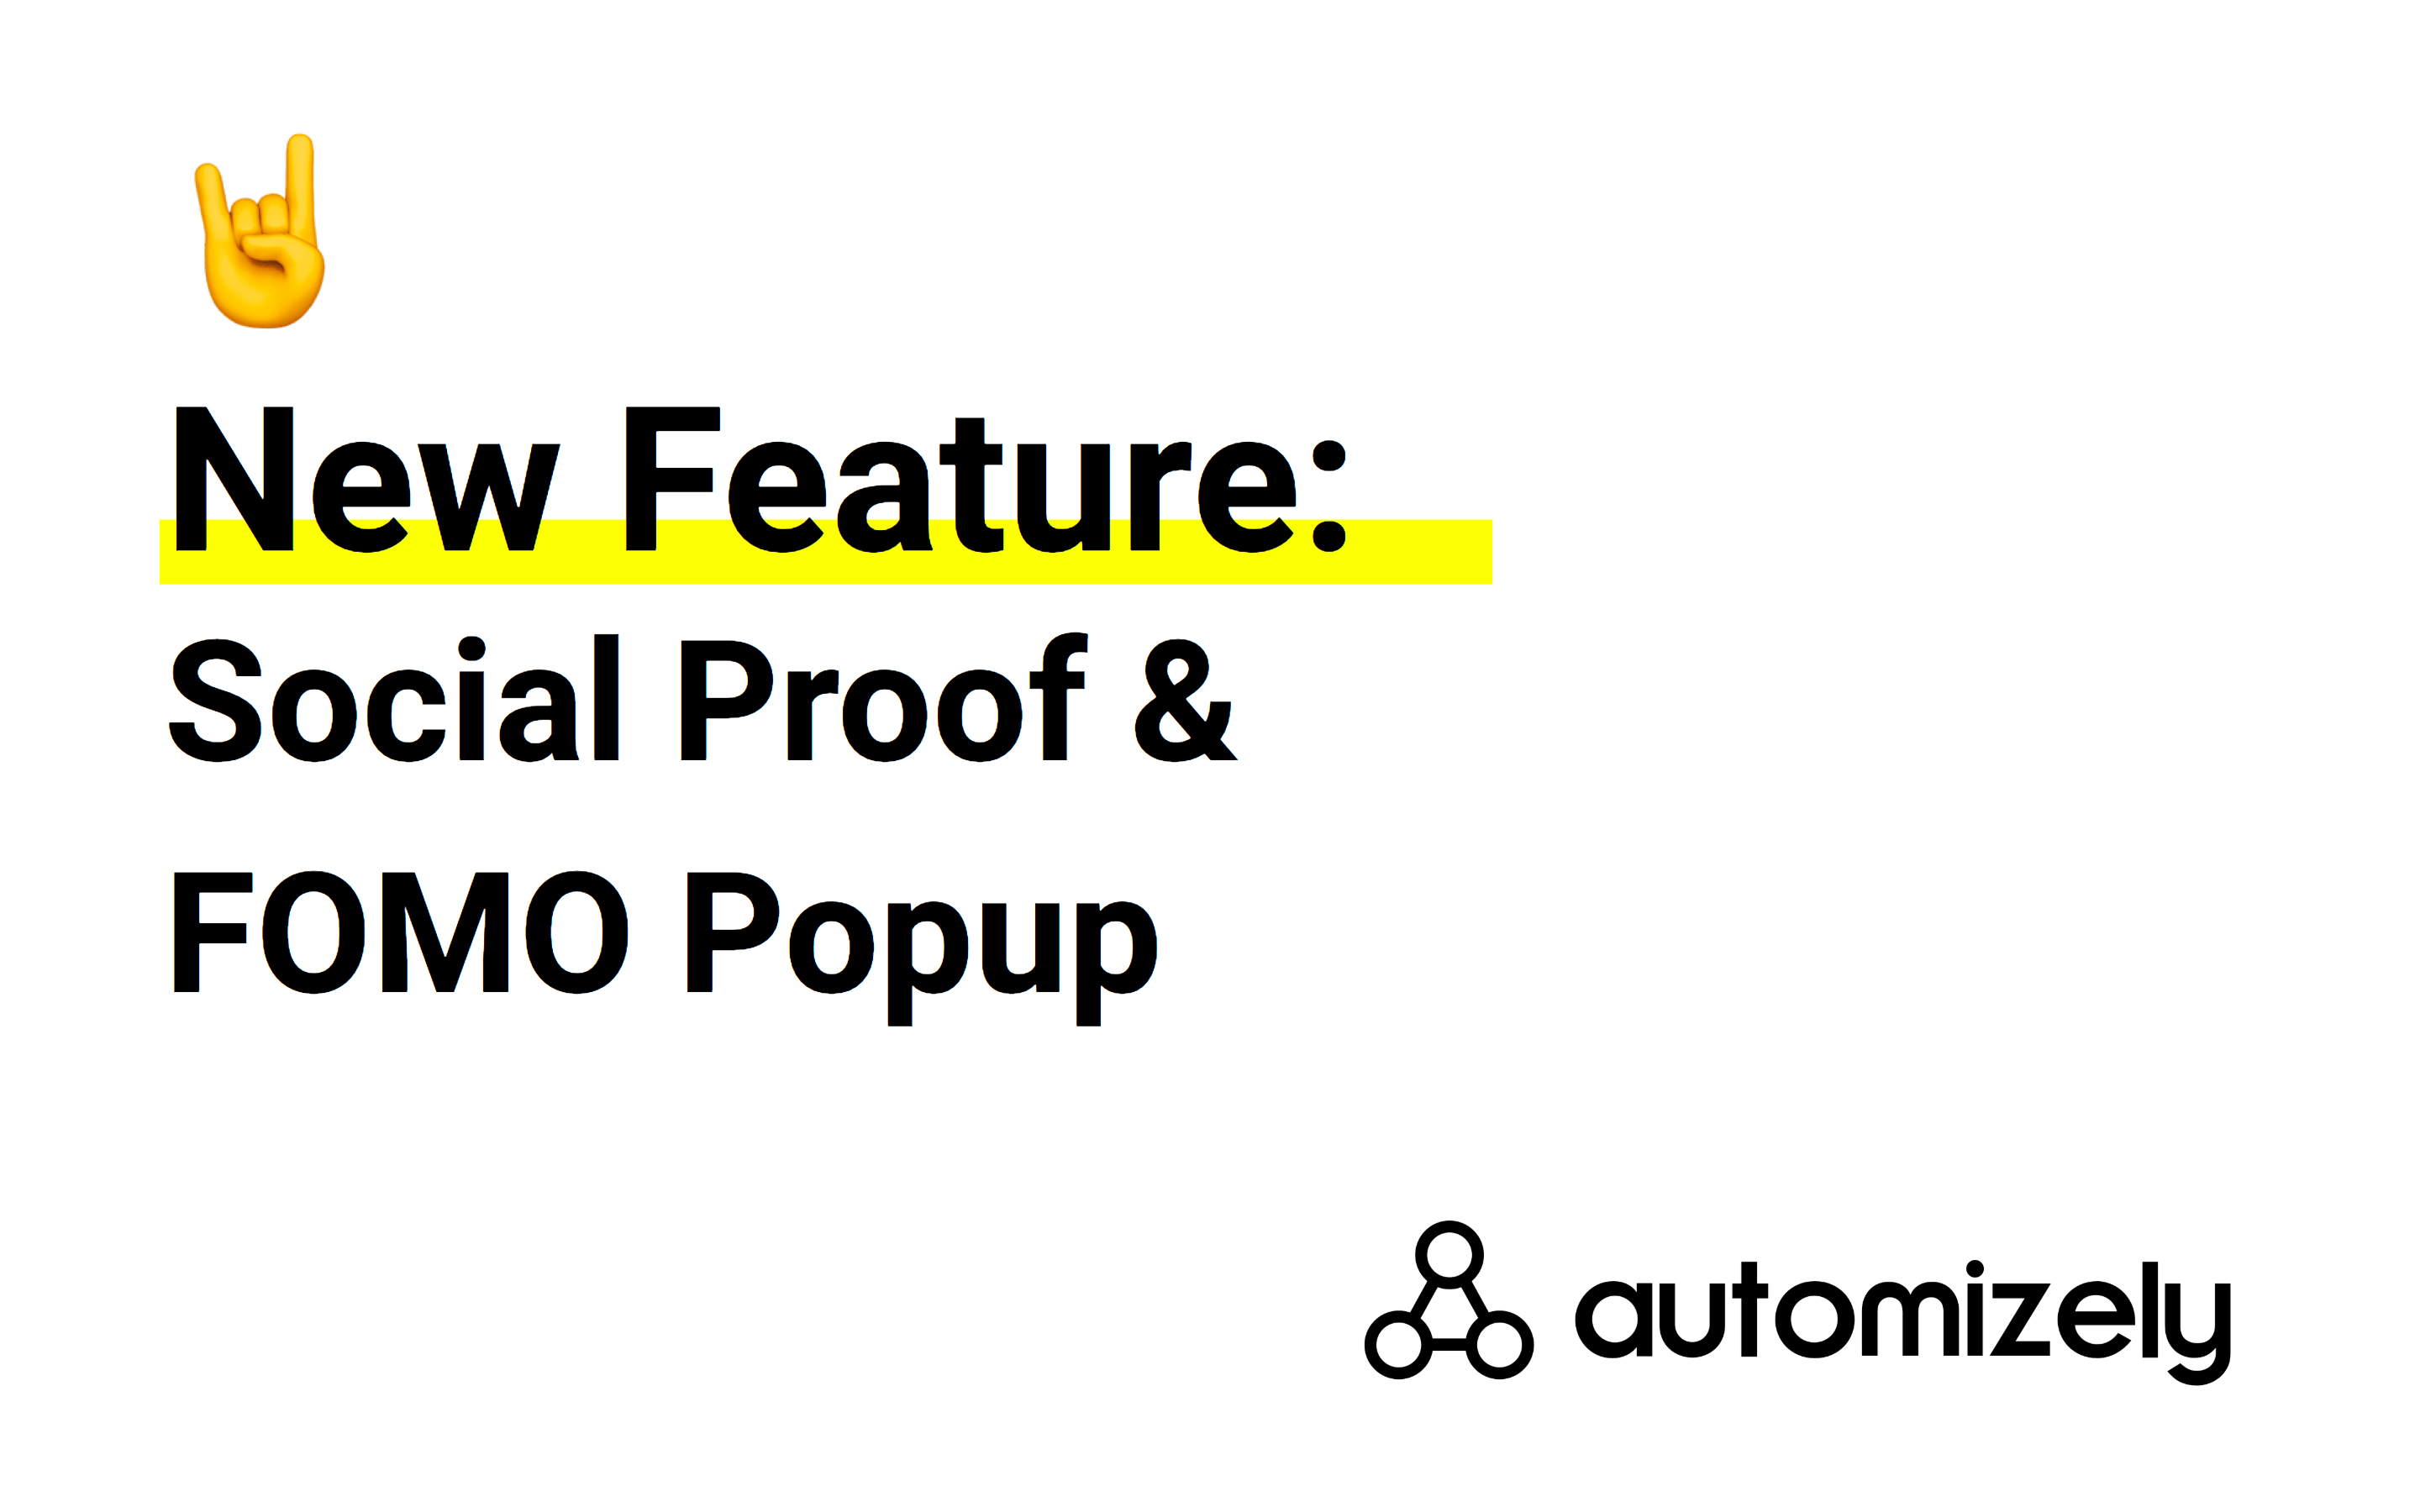 New feature: Social Proof & FOMO Popup